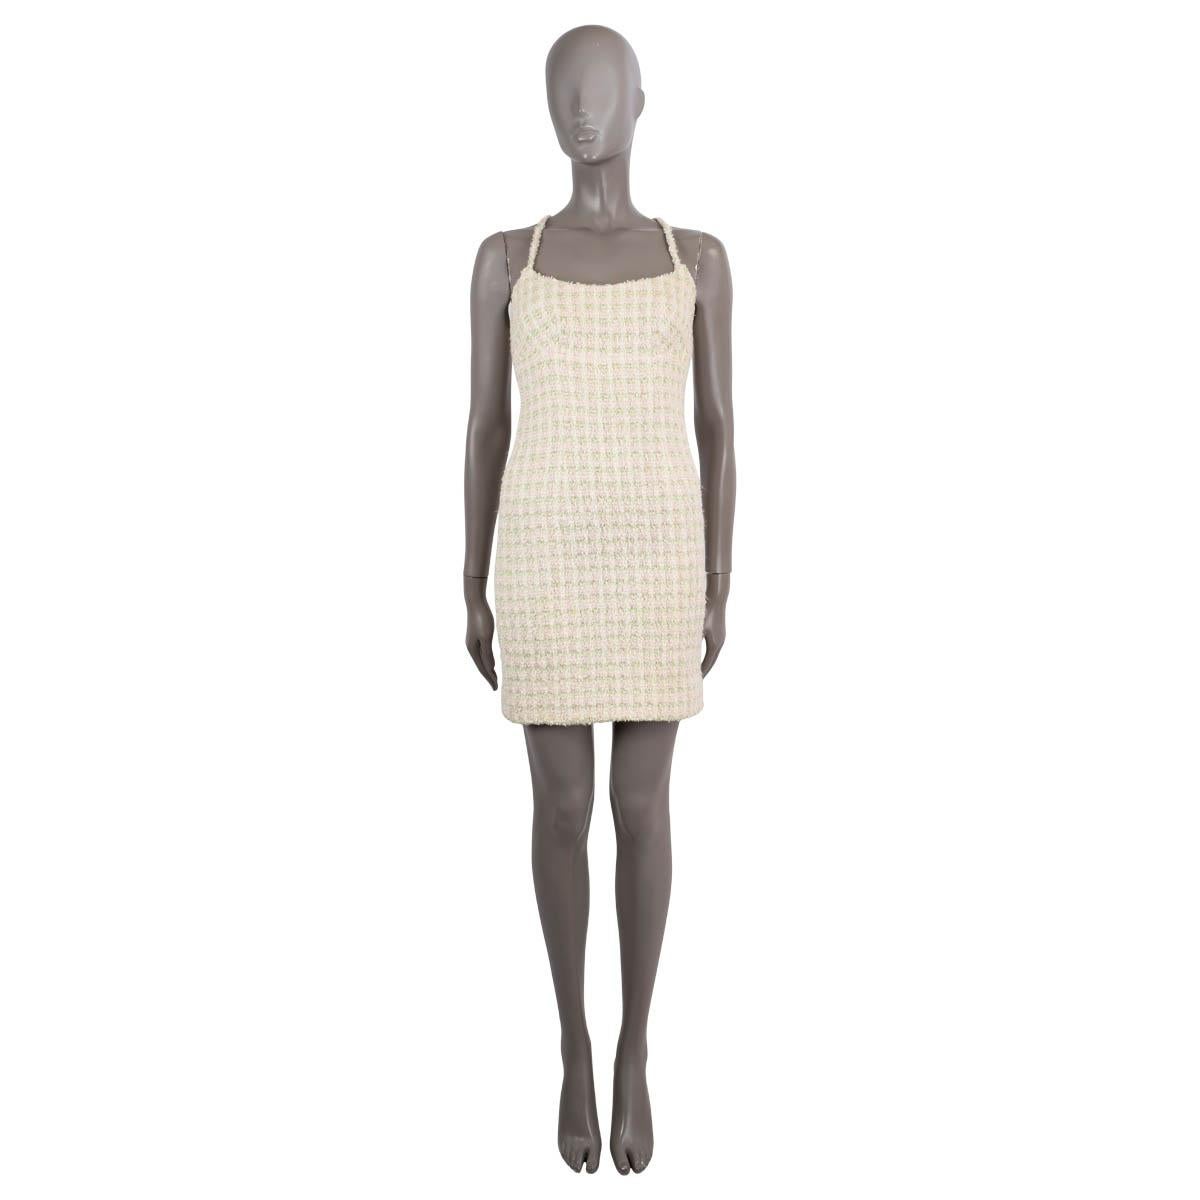 100% authentic Chanel tweed sheath dress in ivory, pale green and pink nylon (49%), acryllic (26%), wool (14%) and viscose (11%). Features a fitted silhouette, spaghetti straps that cross over in the back with two gold-plated logo buttons. Closes